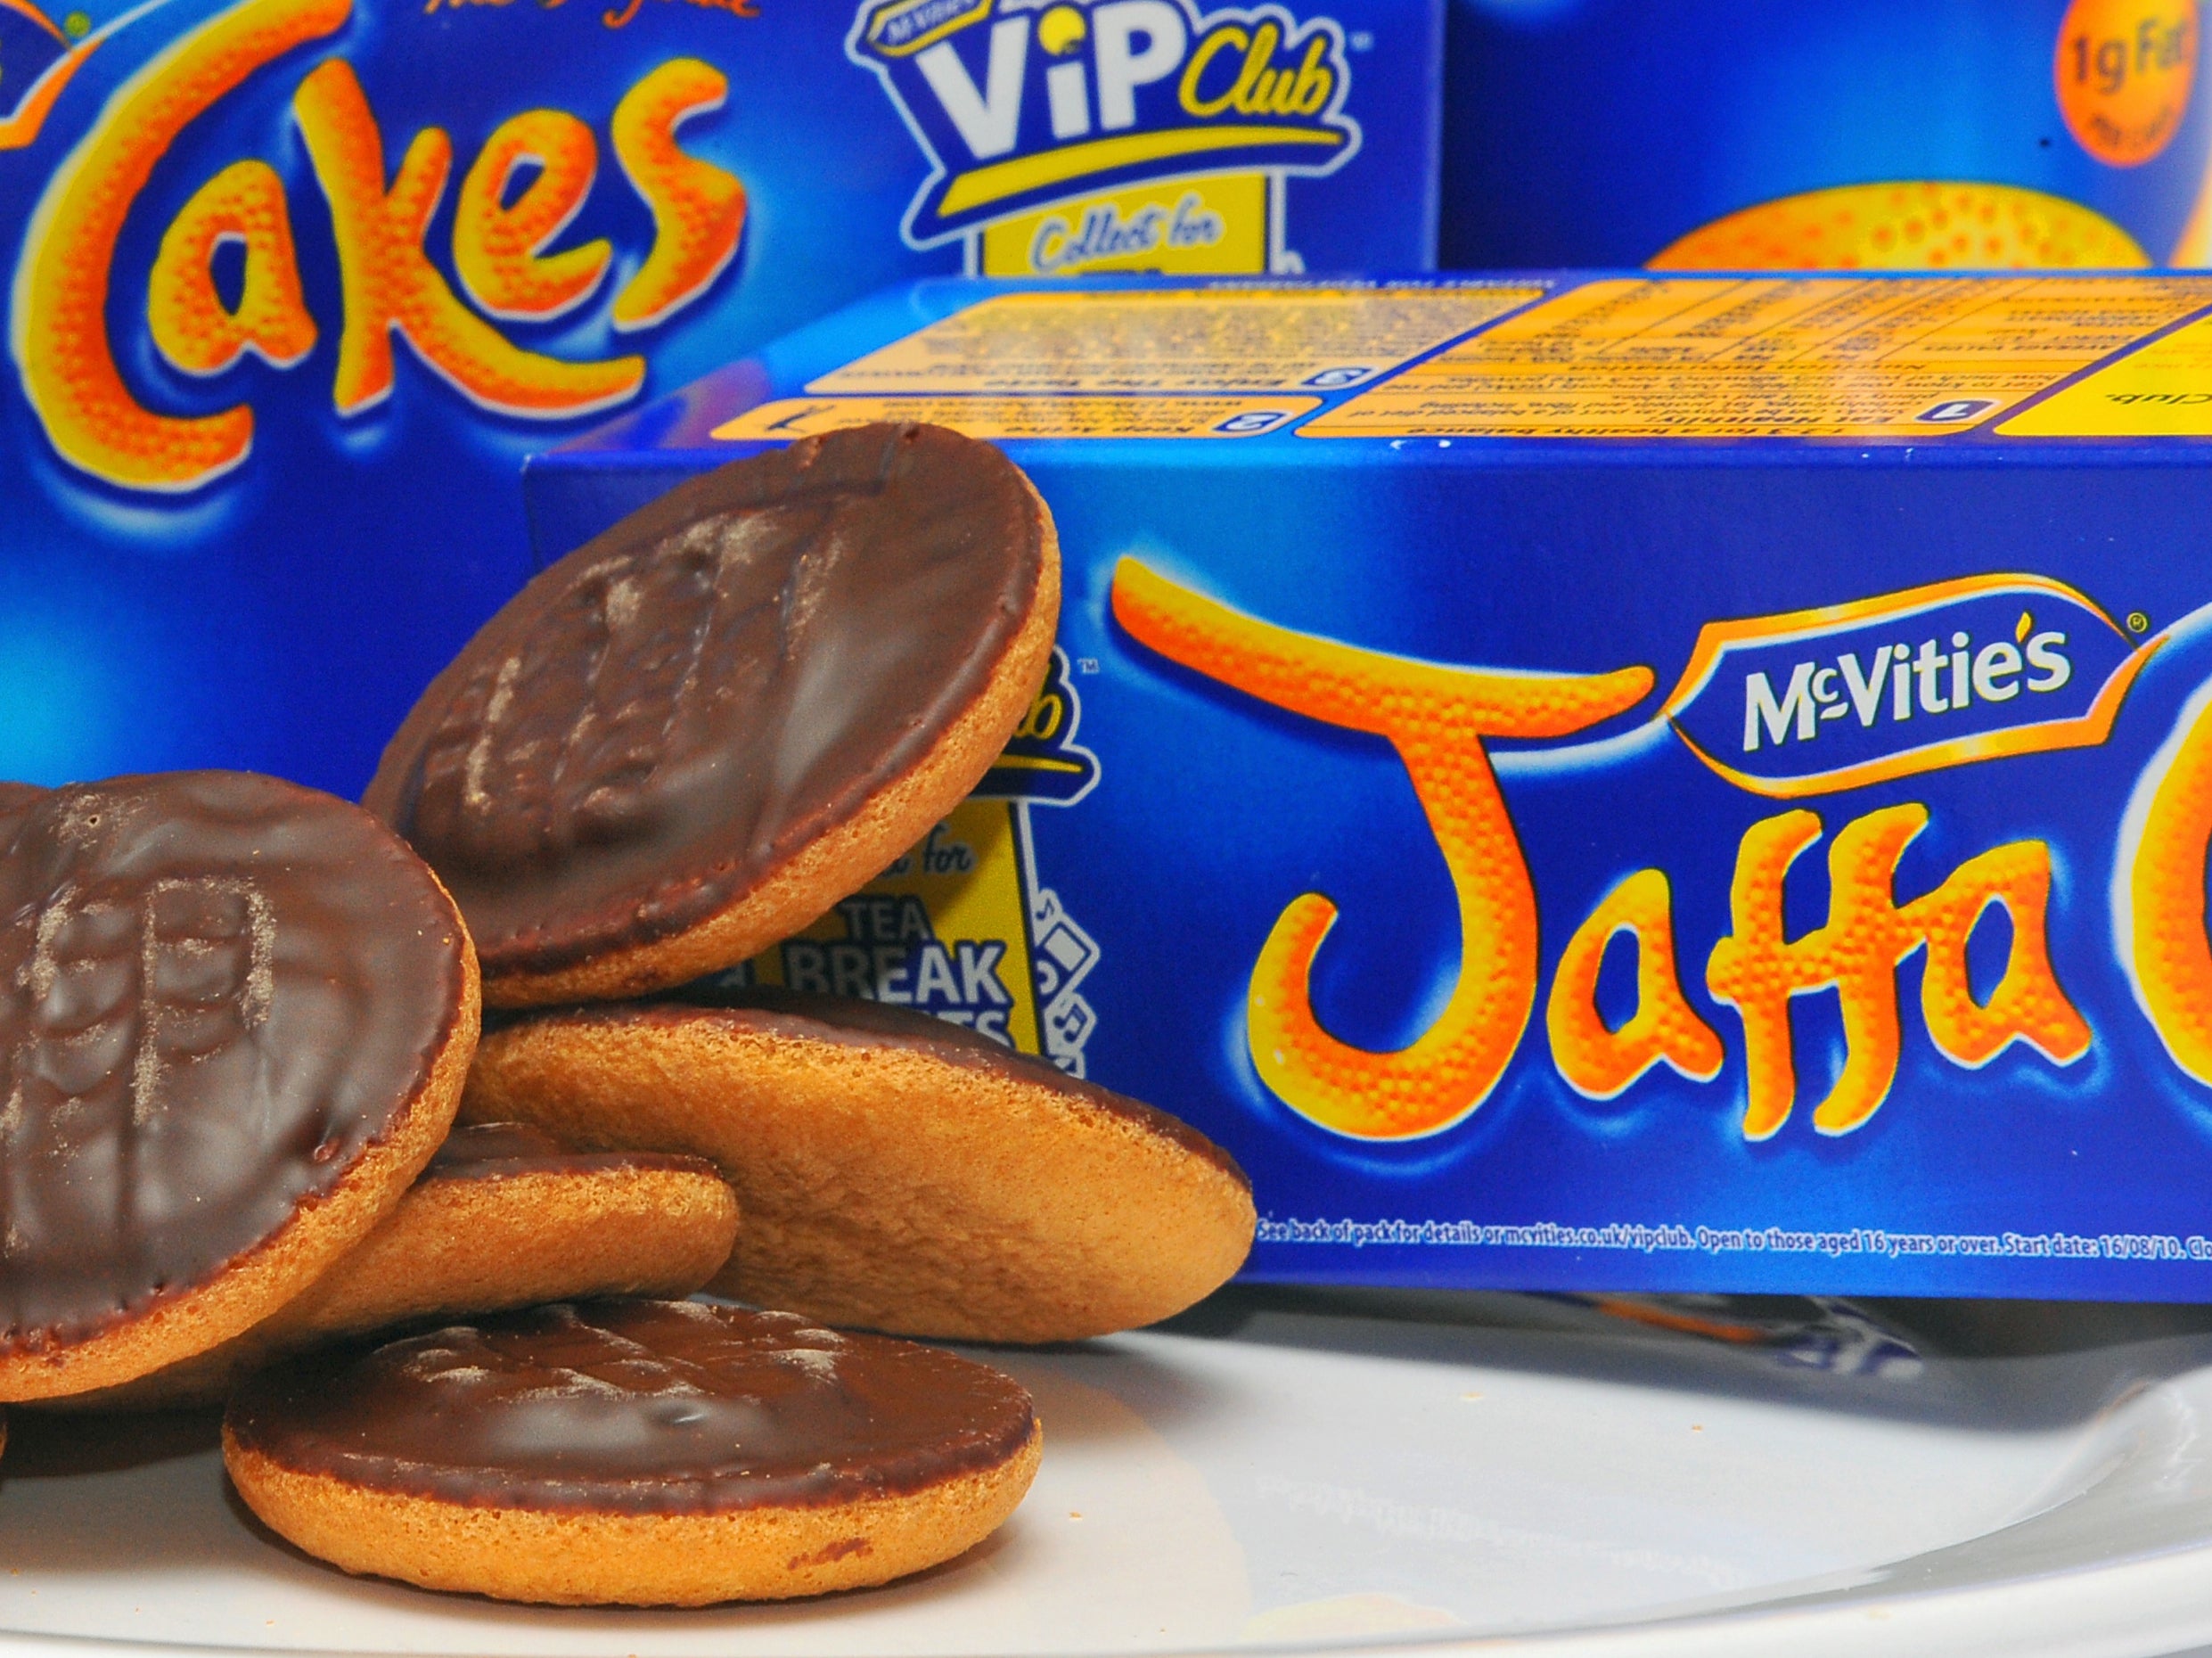 Jaffa Cakes, Hobnobs and Penguins will go up in price, but Chocolate Digestives will remain unaffected